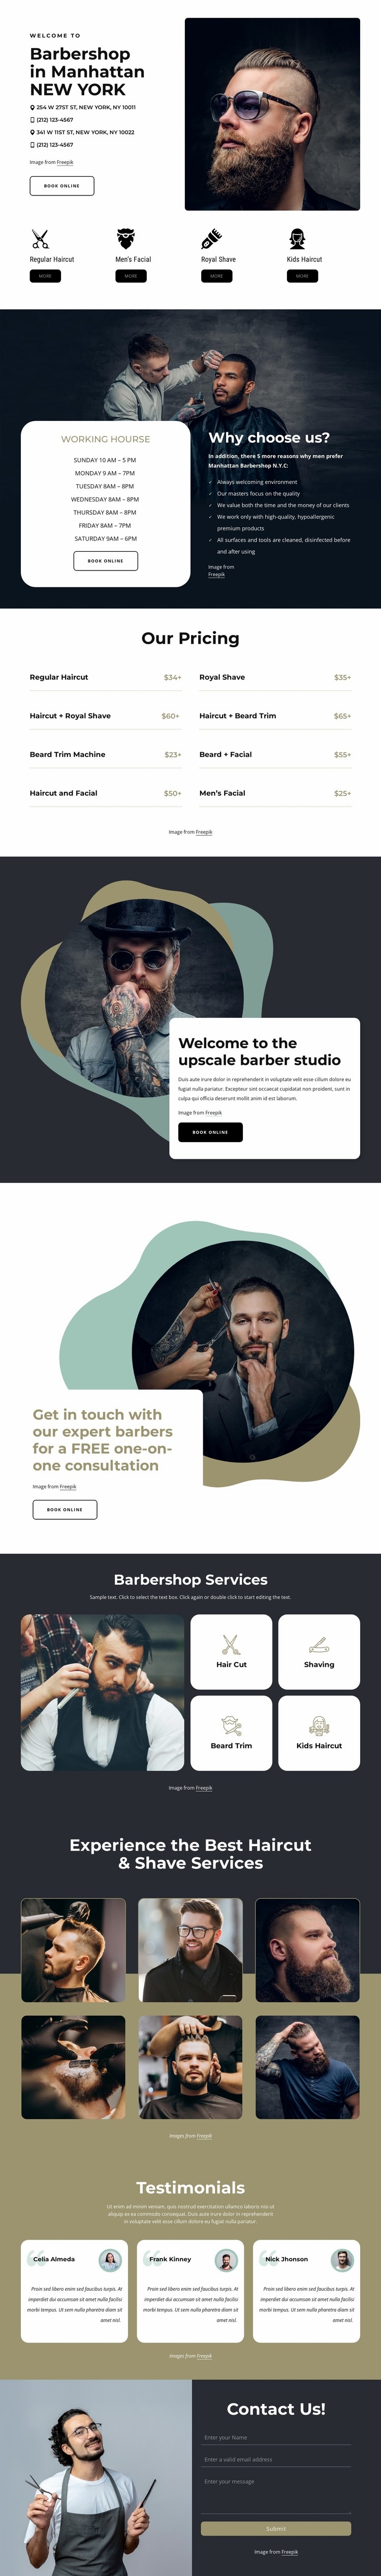 Hight quality grooming services Web Page Designer